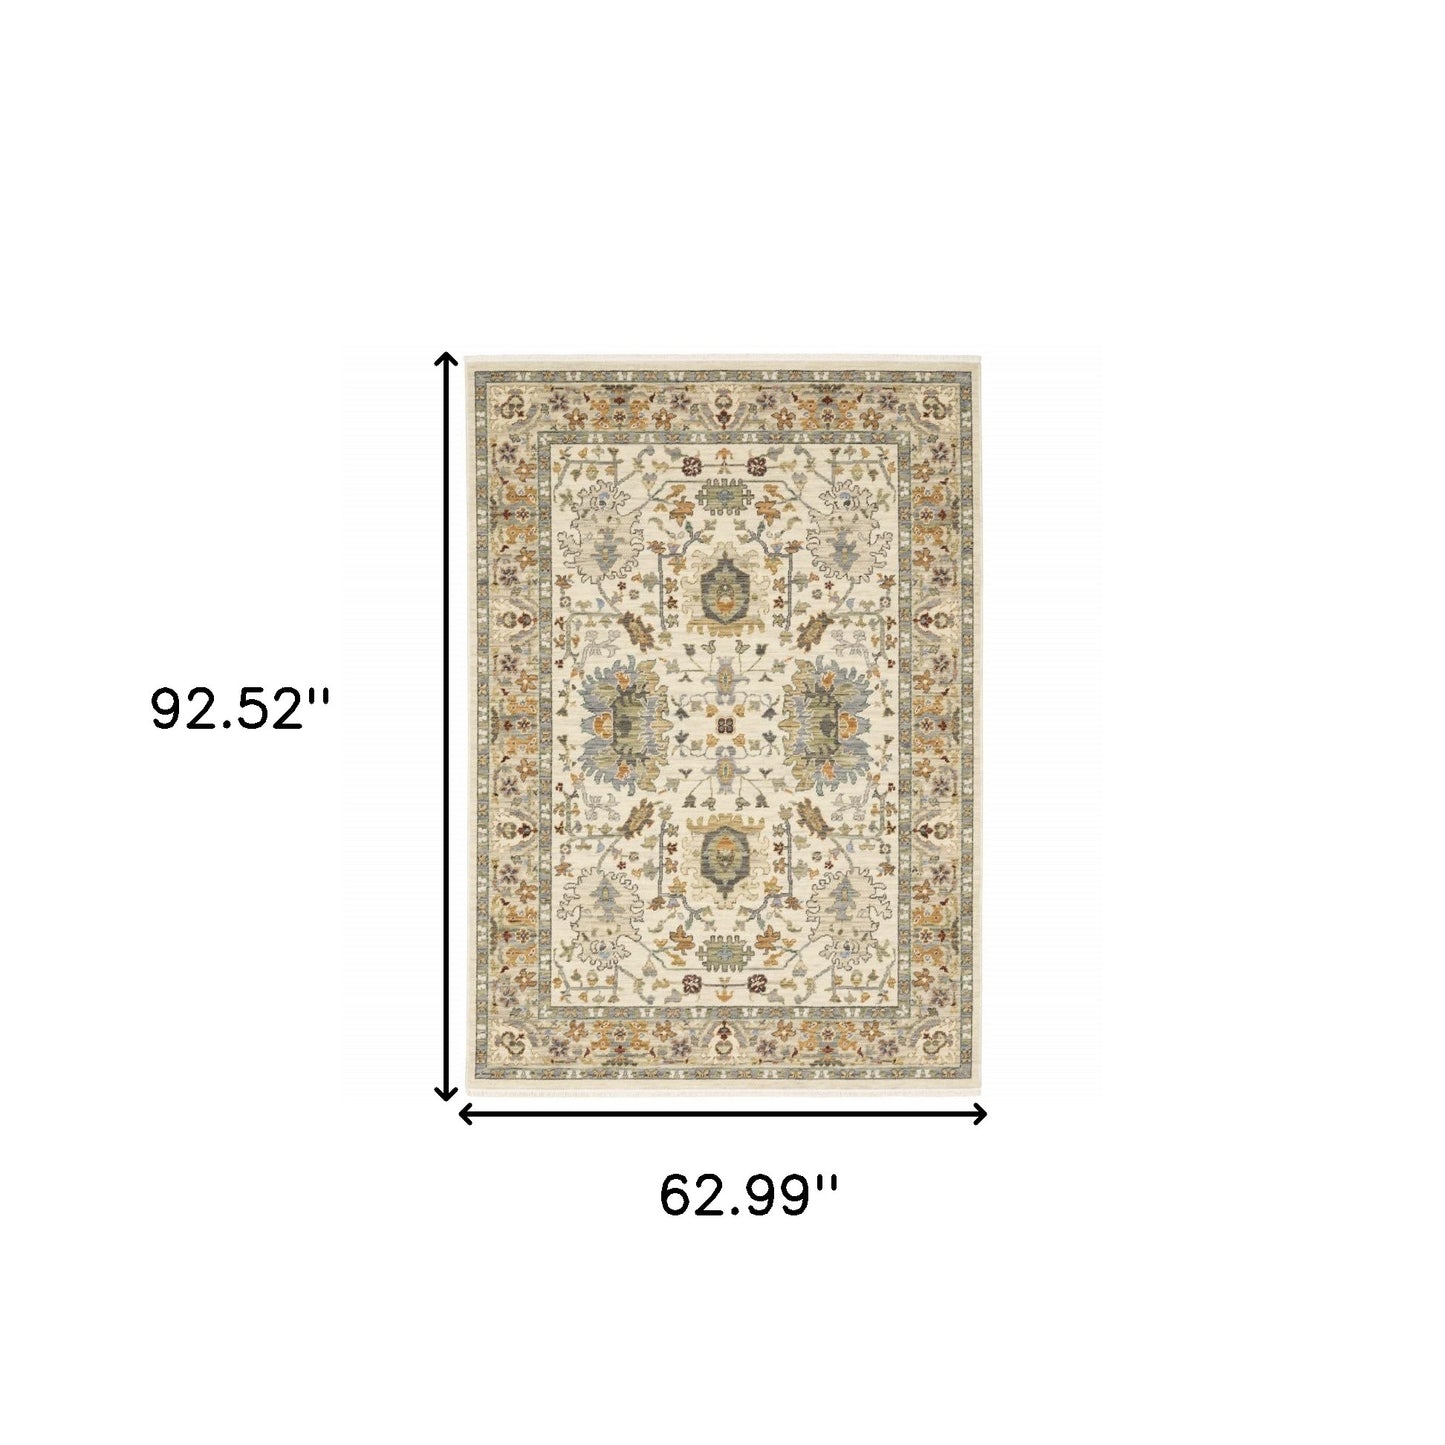 5' X 8' Brown And Ivory Oriental Power Loom Stain Resistant Area Rug With Fringe